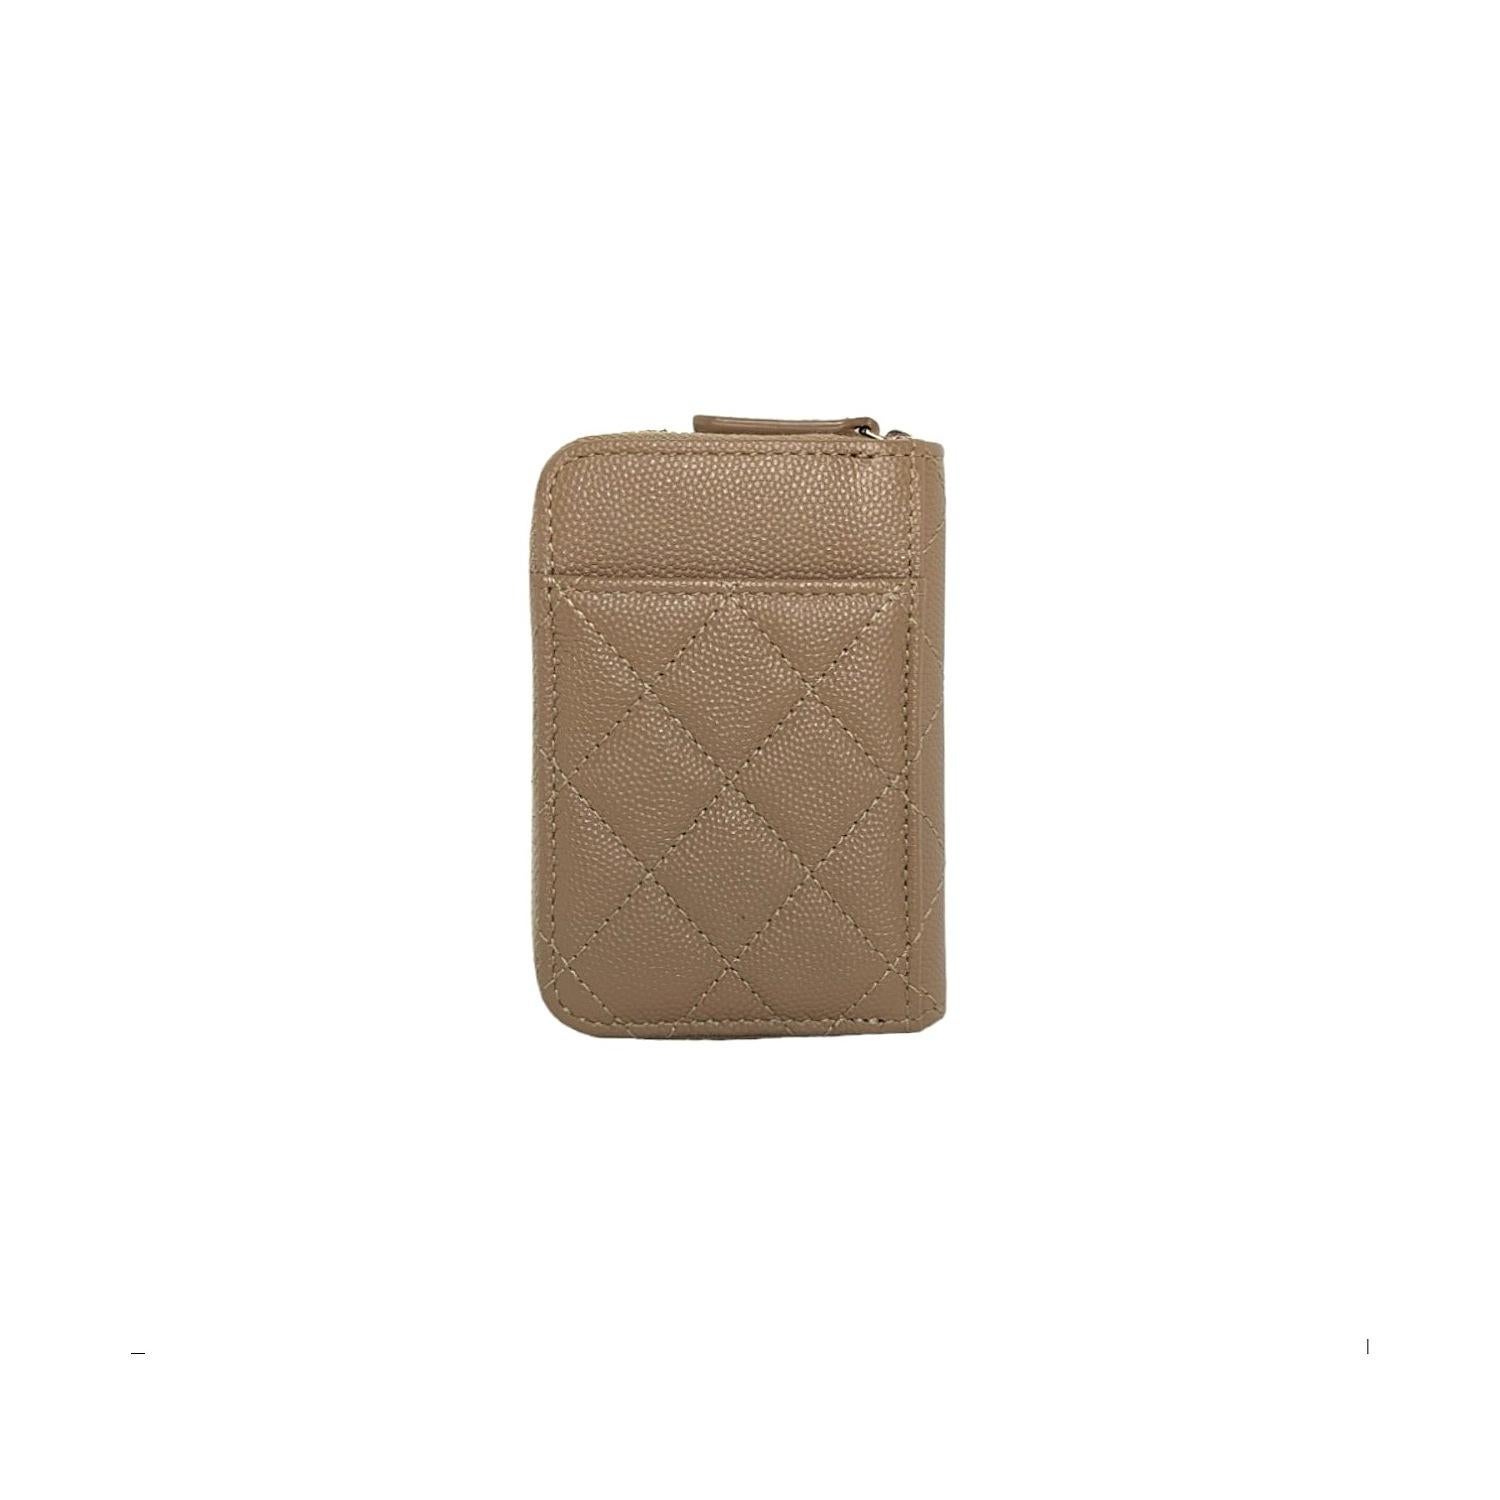 This petite wallet is crafted of dark beige caviar leather and features card slots on back and front, and a 3/4 wrap-around light gold zipper and a small polished light gold CC logo on the front. The zipper opens to a partitioned matching fabric